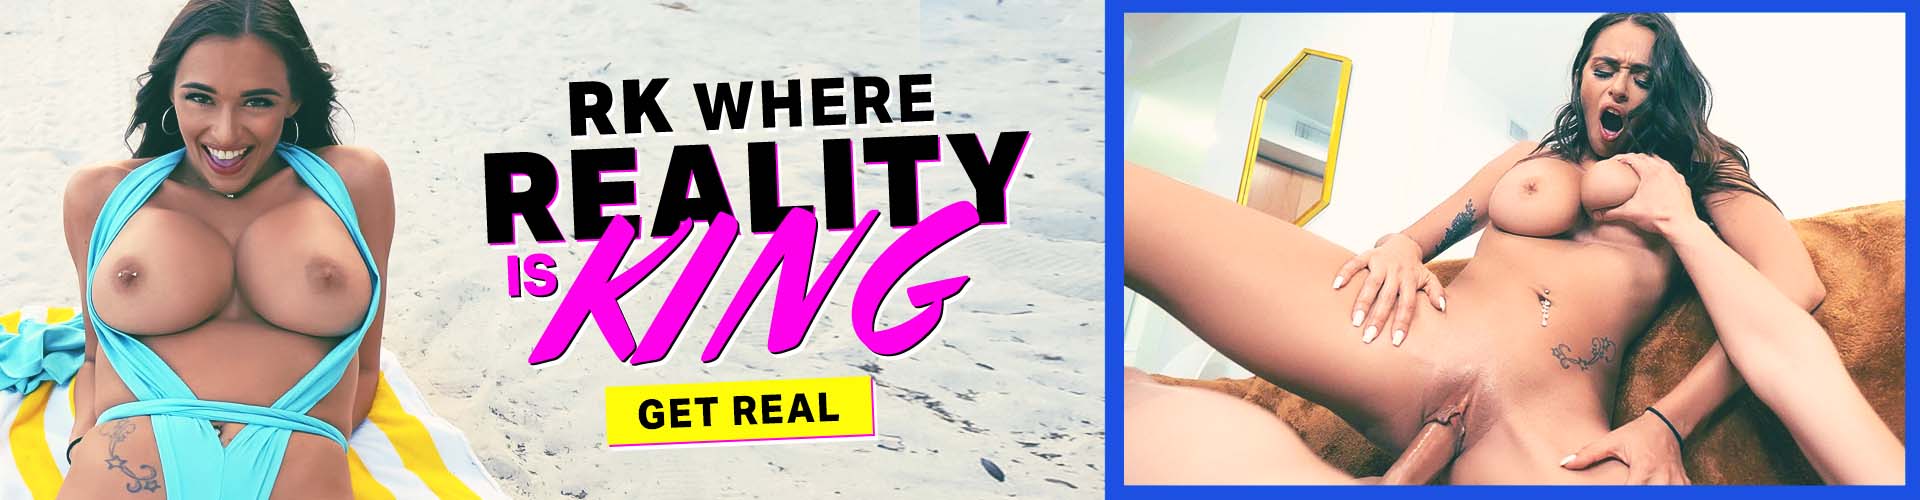 RealityKings porn site network